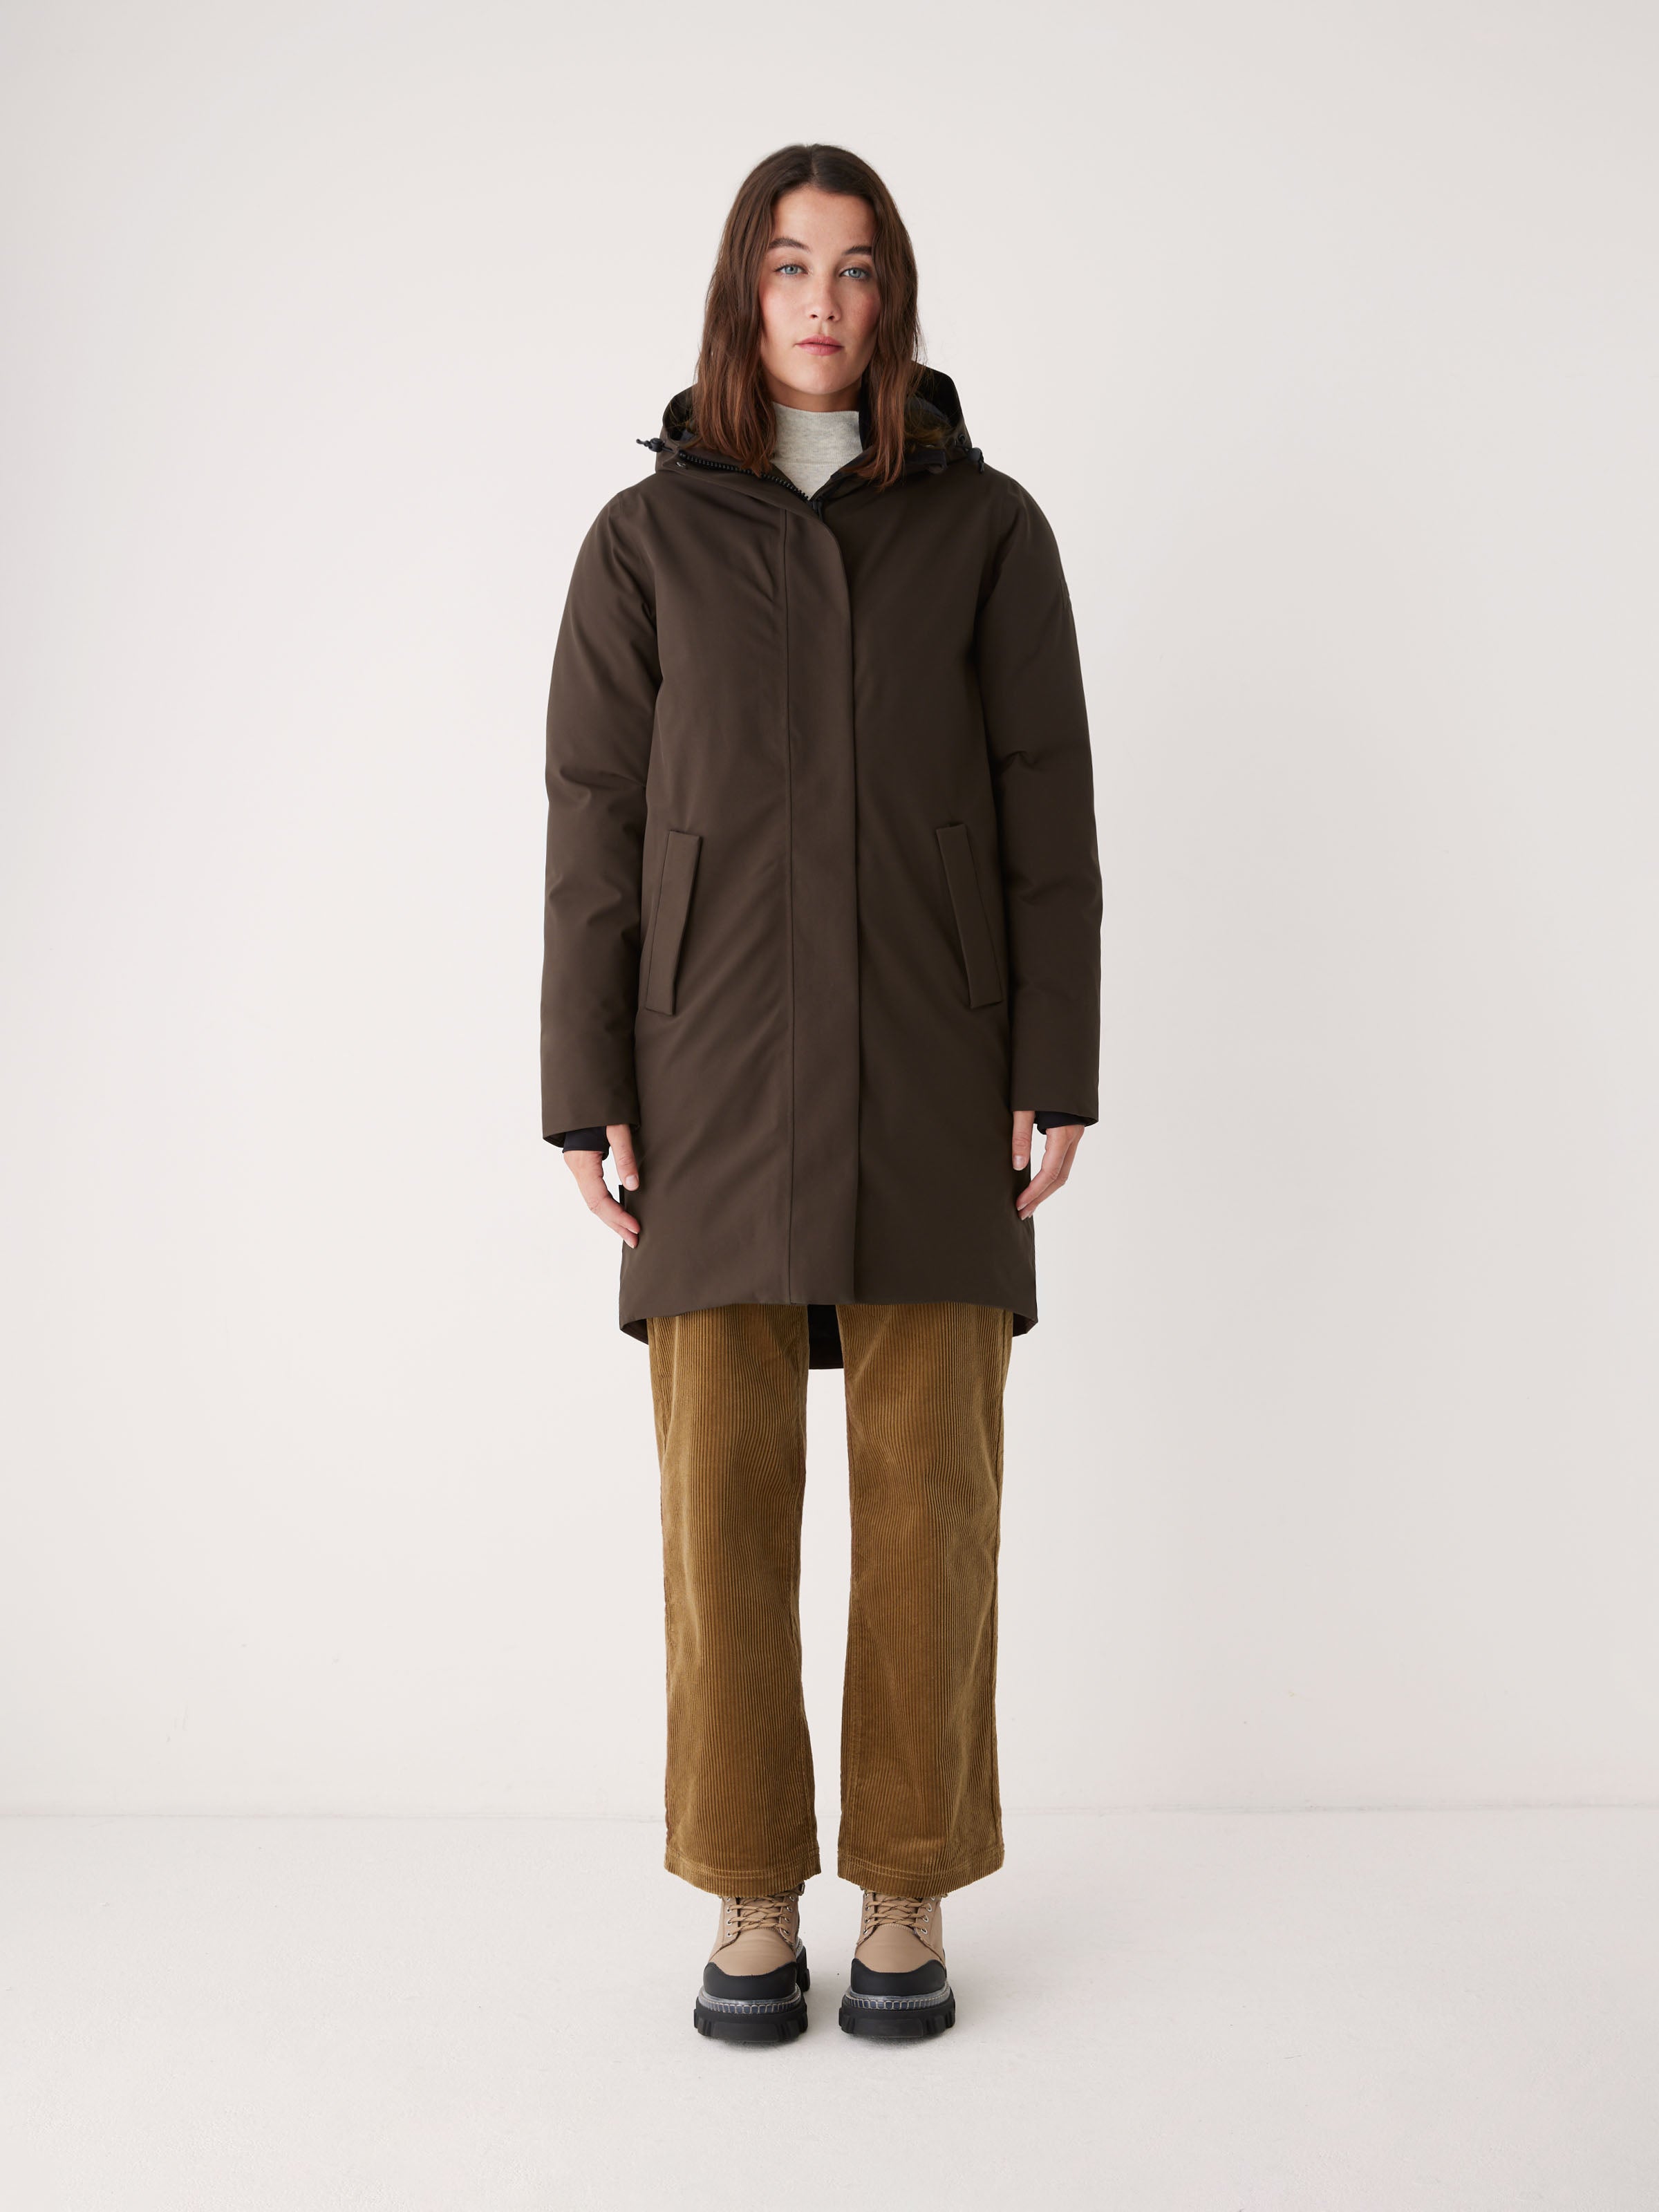 Go Frank, Ladies Cold Winter Long Parka With Fur Lining in Deep